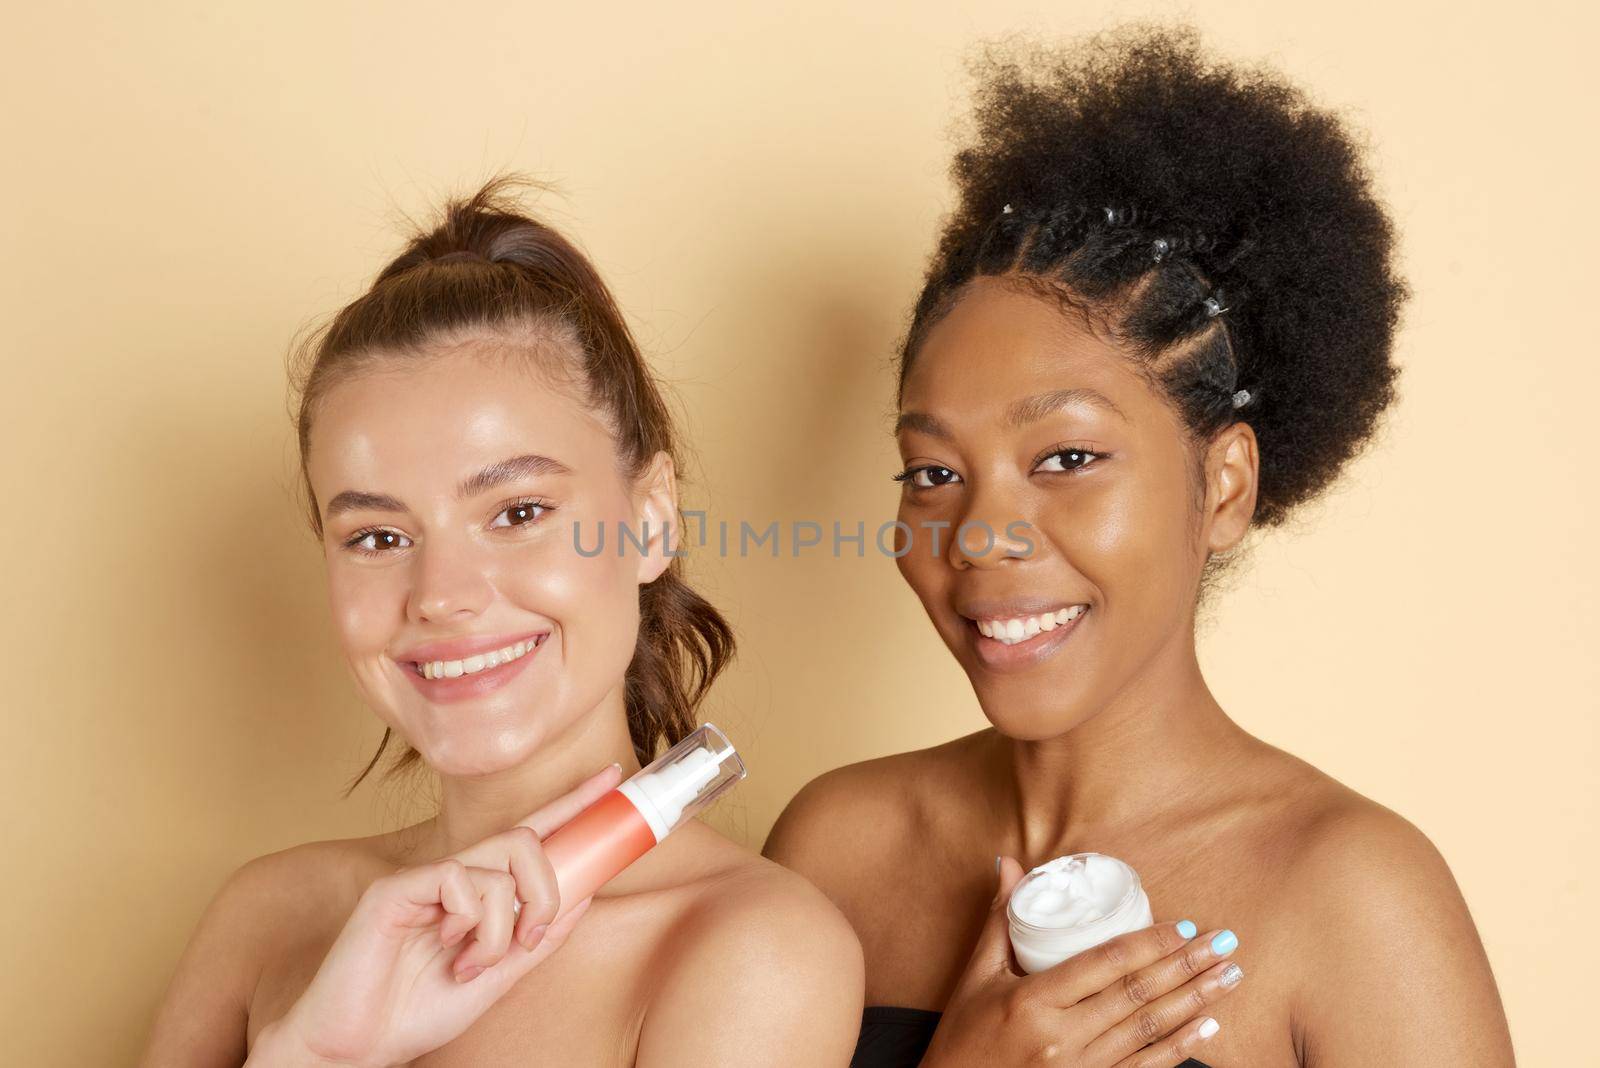 Smiling women hold jat of cosmetic moisturizer or face mask. Photo of attractive multiethnic women with perfect make-up on a beige background. Beauty concept.